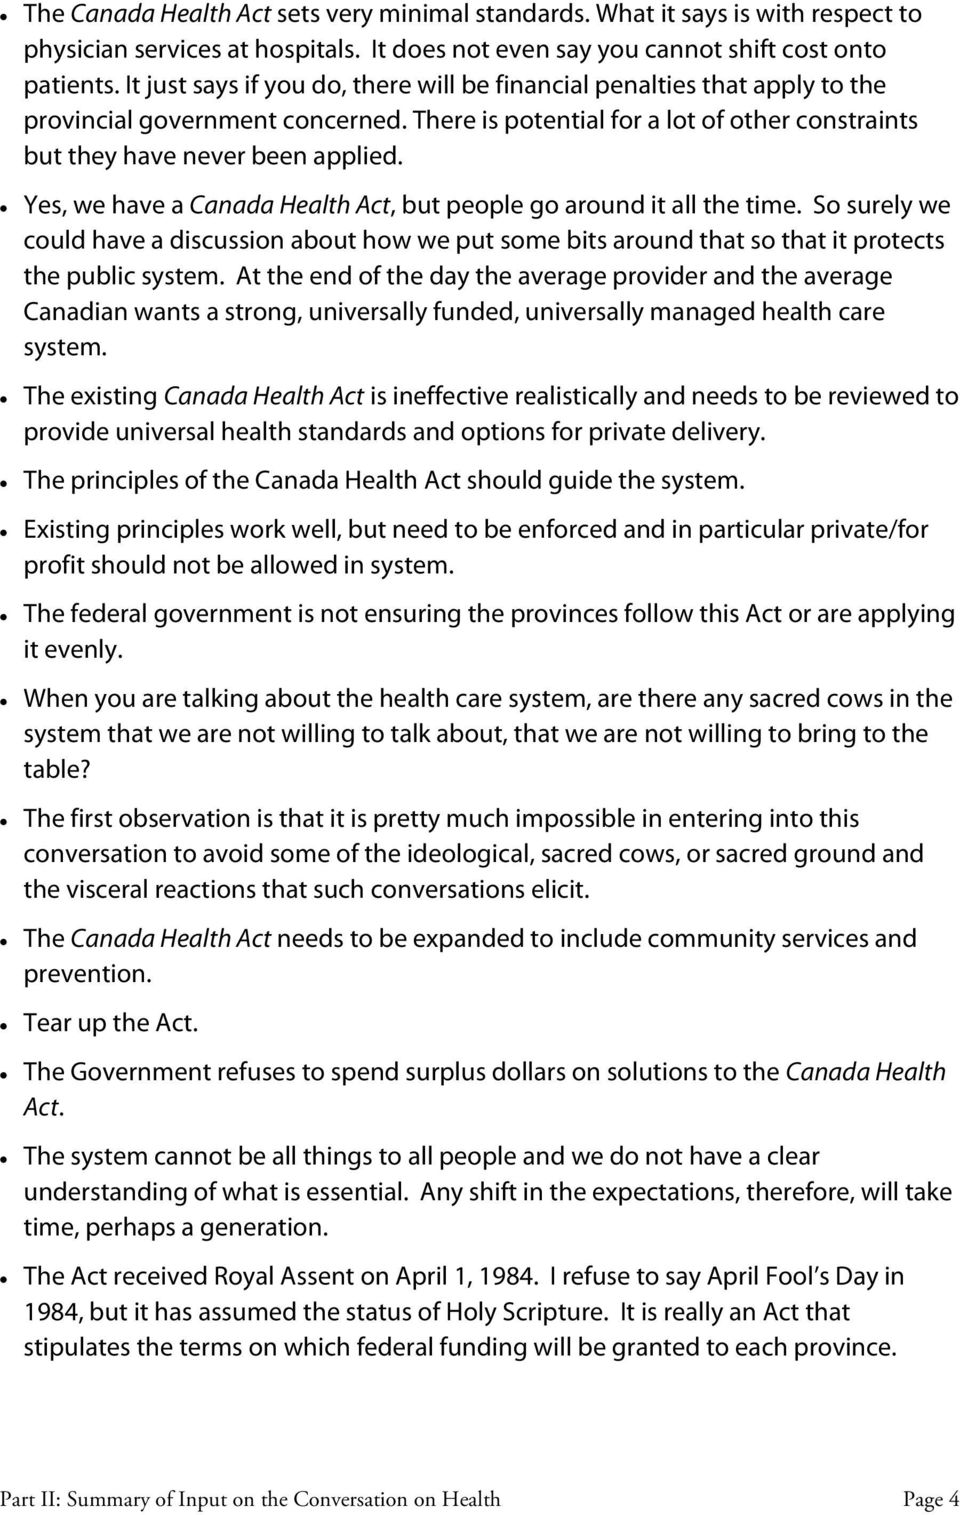 Yes, we have a Canada Health Act, but people go around it all the time. So surely we could have a discussion about how we put some bits around that so that it protects the public system.